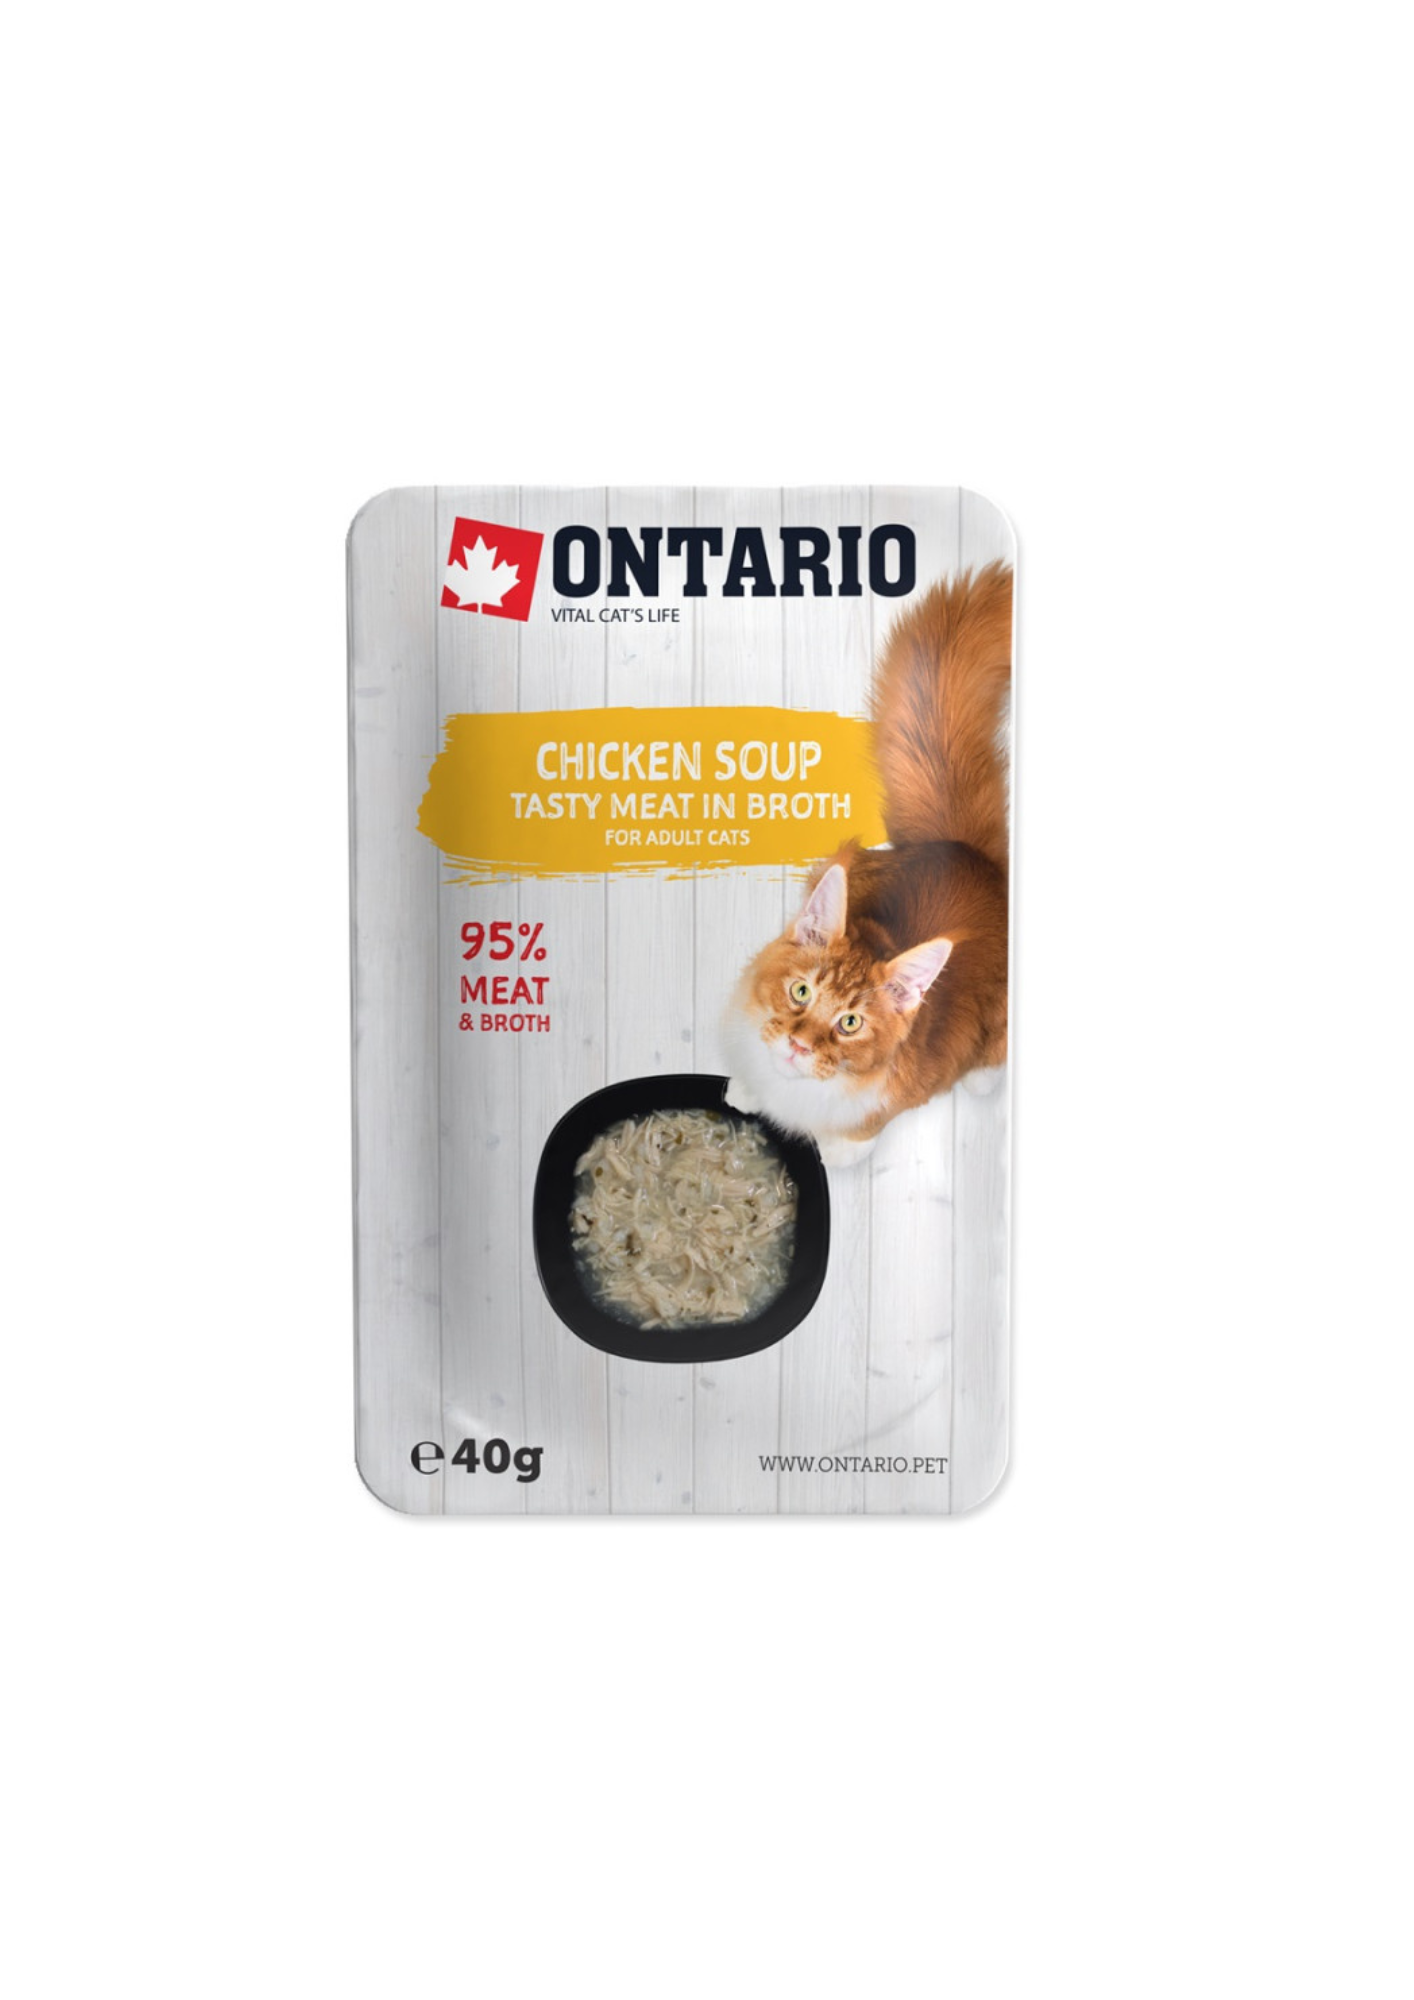 Ontario Soup Adult Wet Cat Food with Chicken and Vegetables, 40g